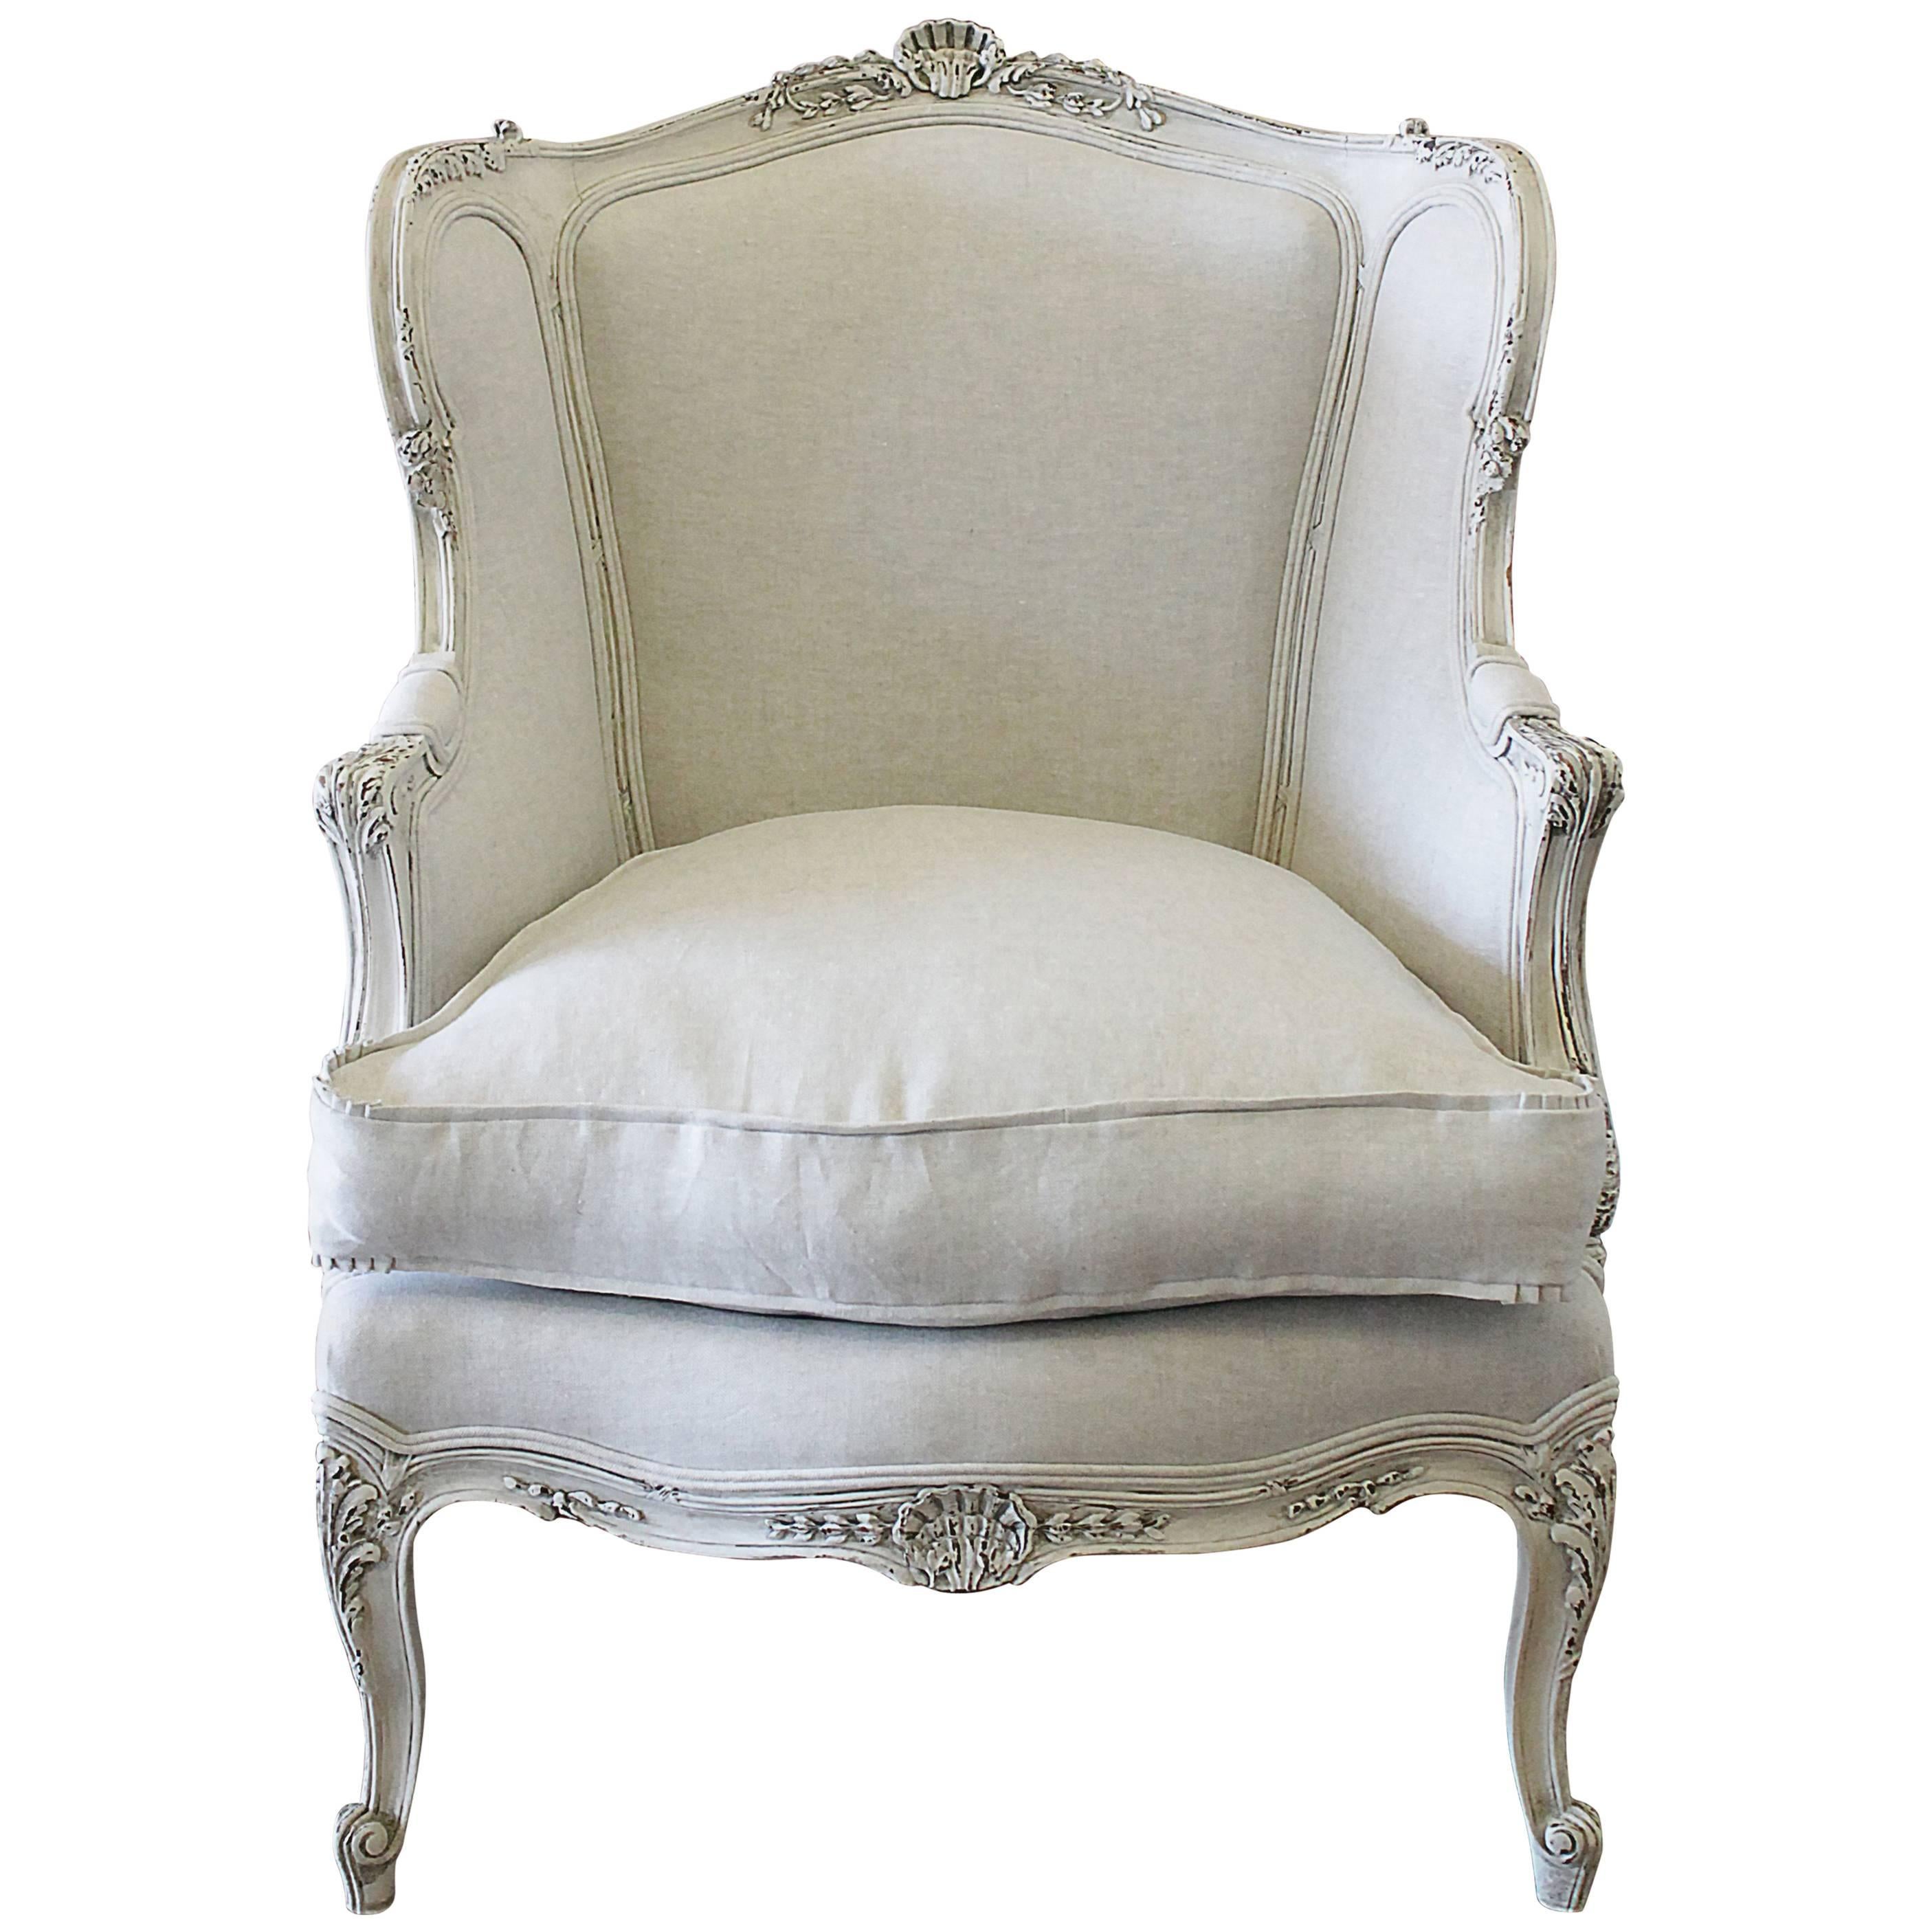 19th Century Louis XV Style Carved French Rococo Wing Back Chair